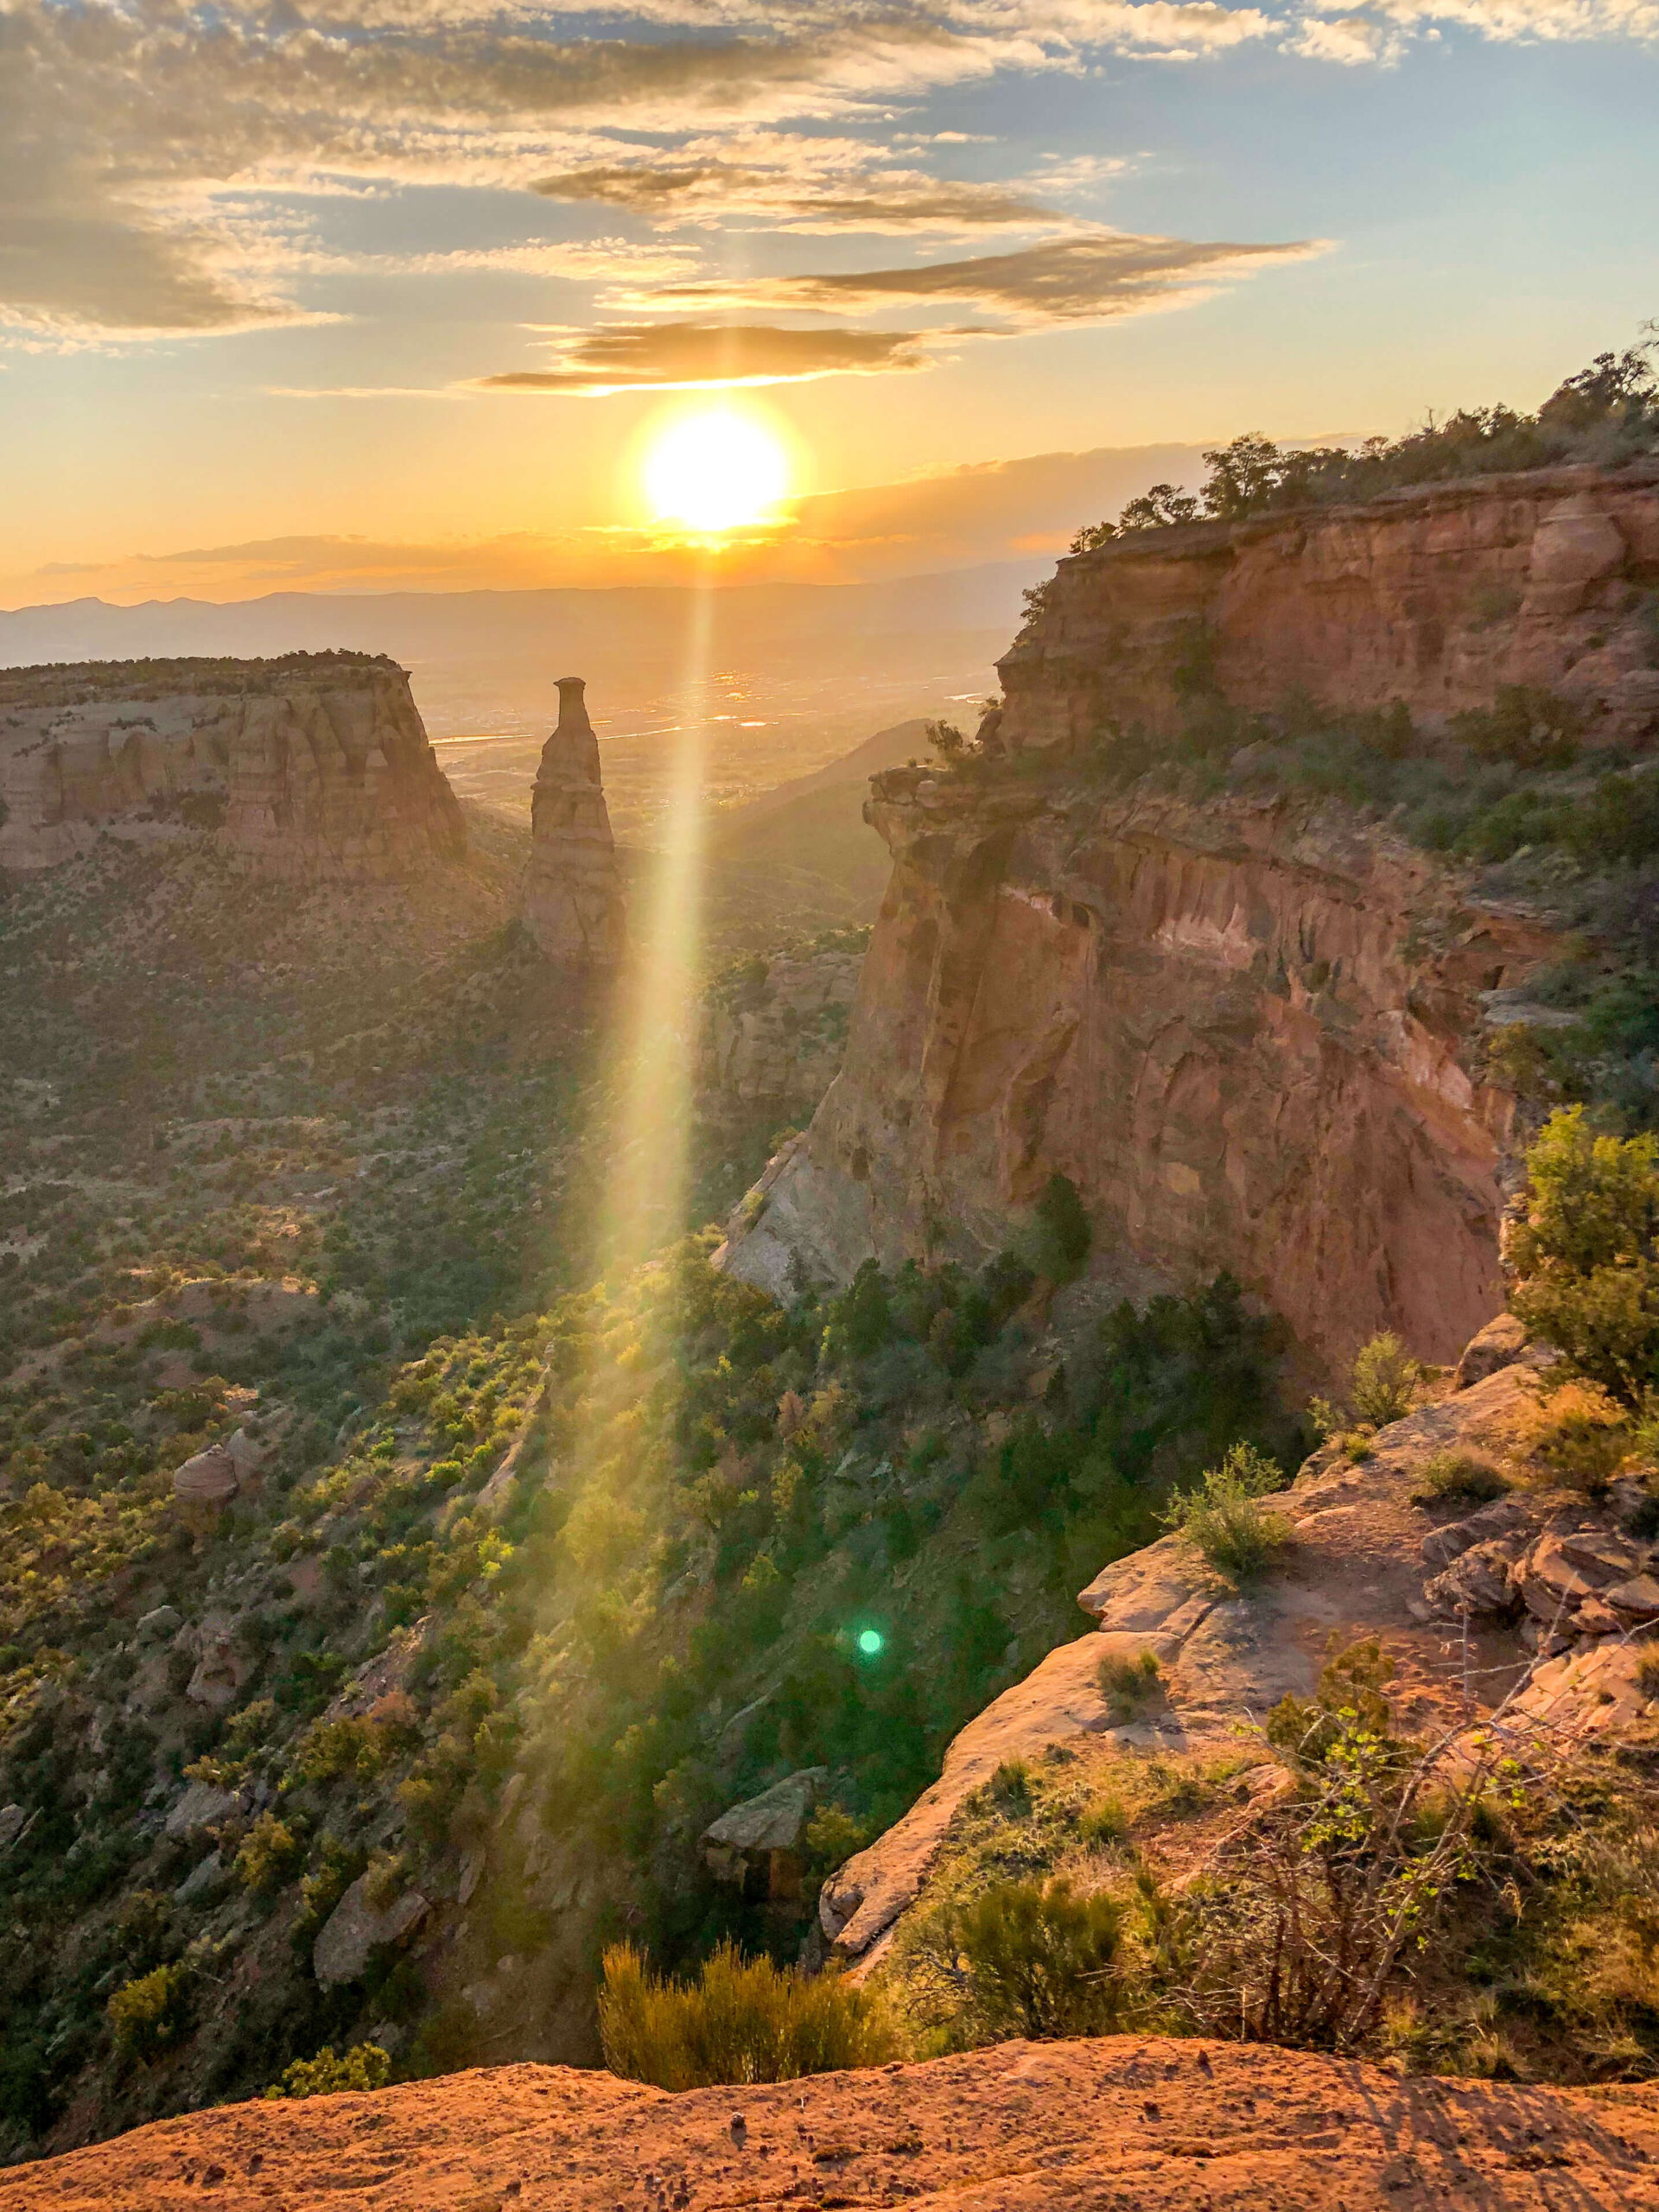 Sunrise over Colorado National Monument and Independence Monument.